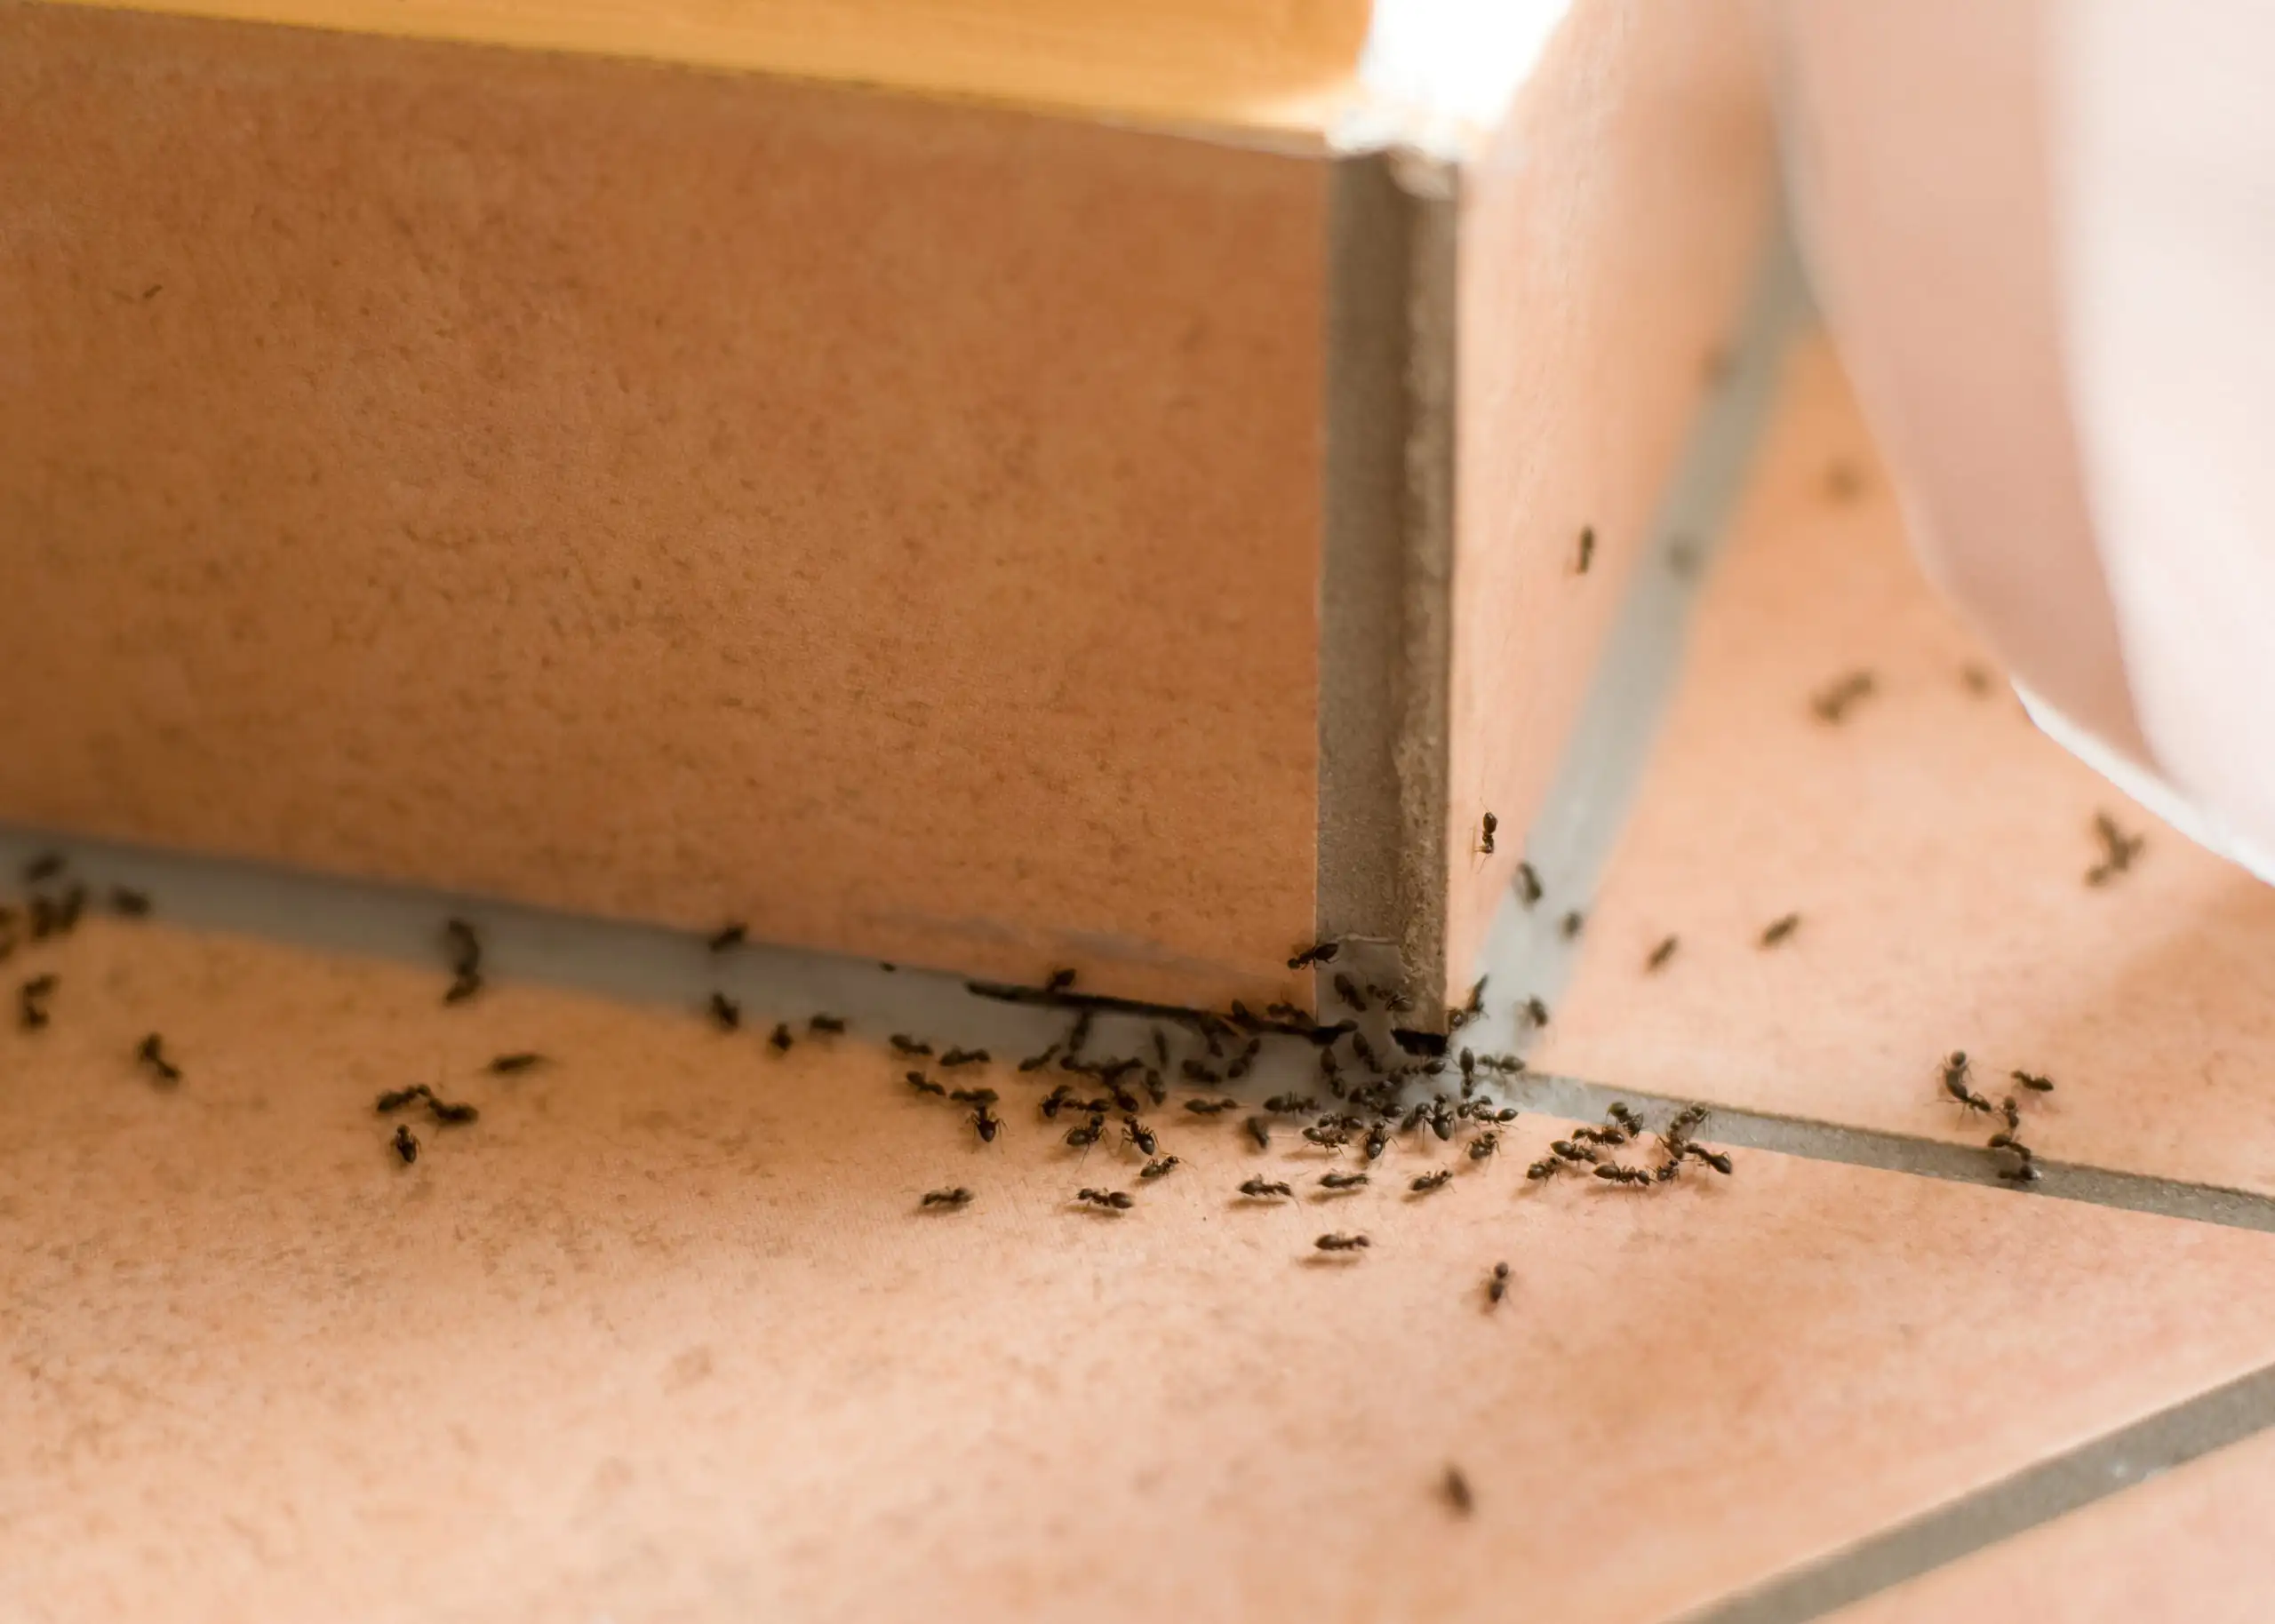 A cluster of ants on a kitchen floor - keep pests away from your home with Arrow Exterminating Company in NY